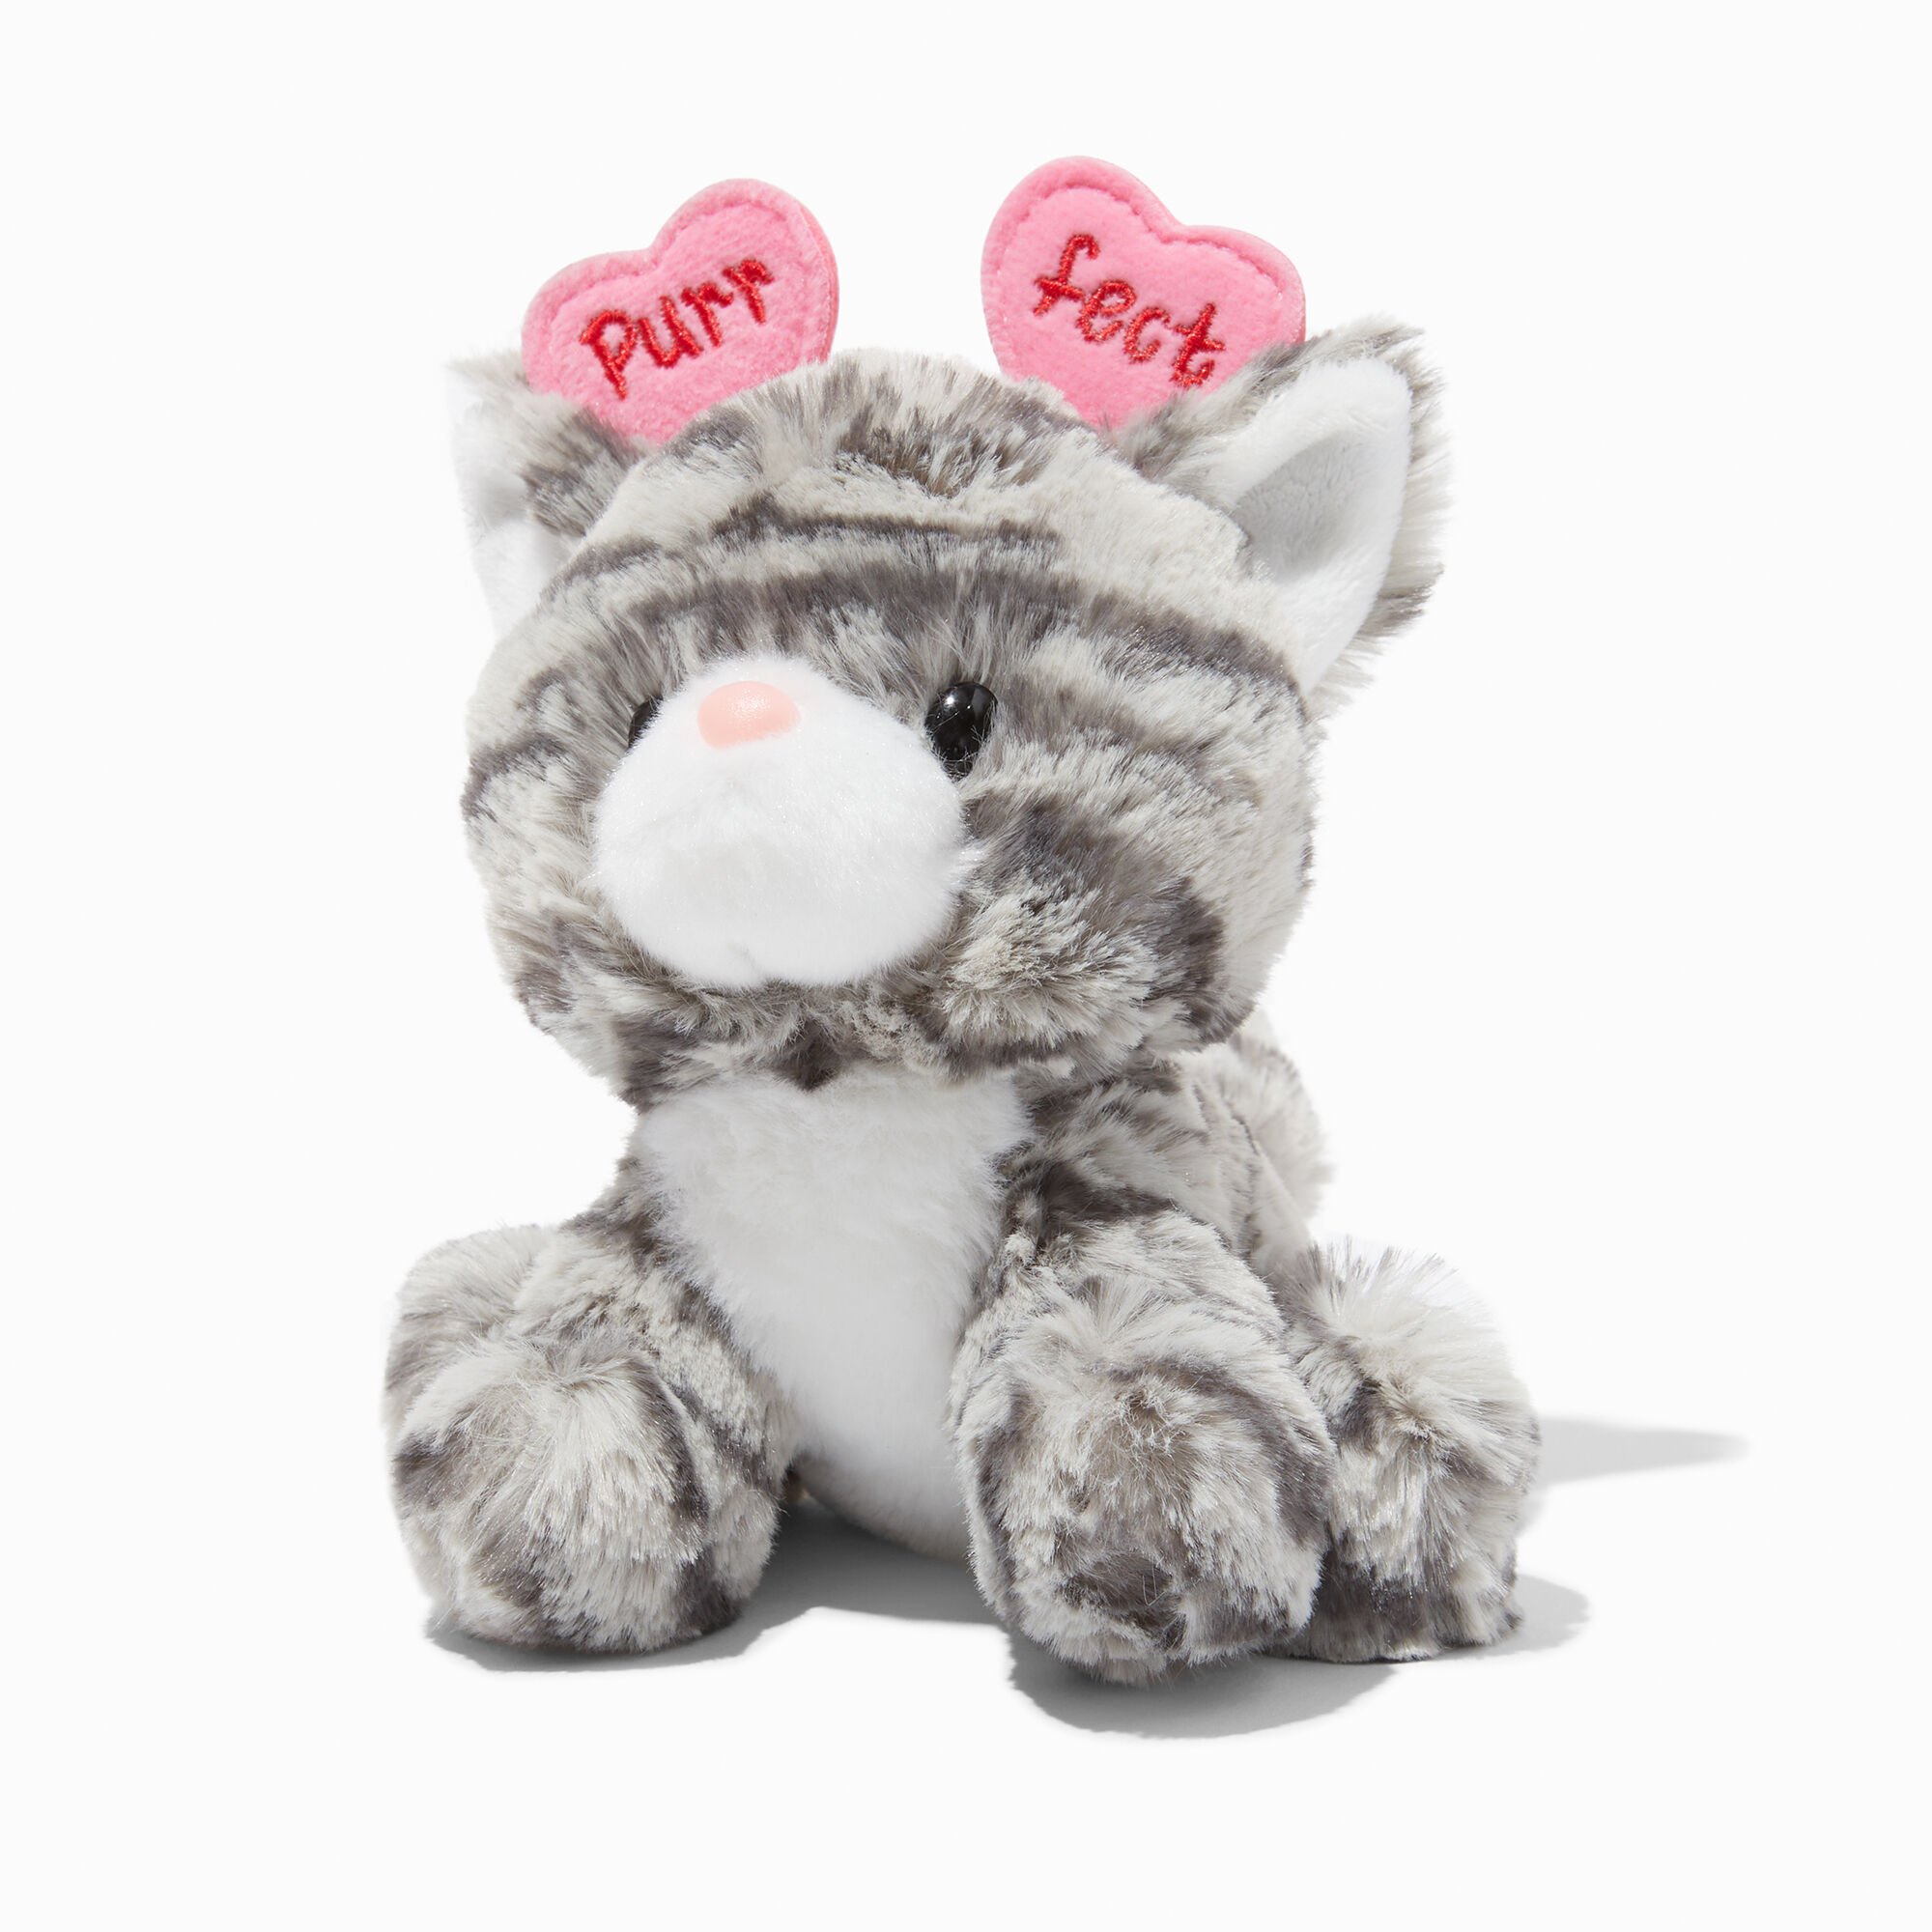 View Claires purrFect Cat 8 Soft Toy information